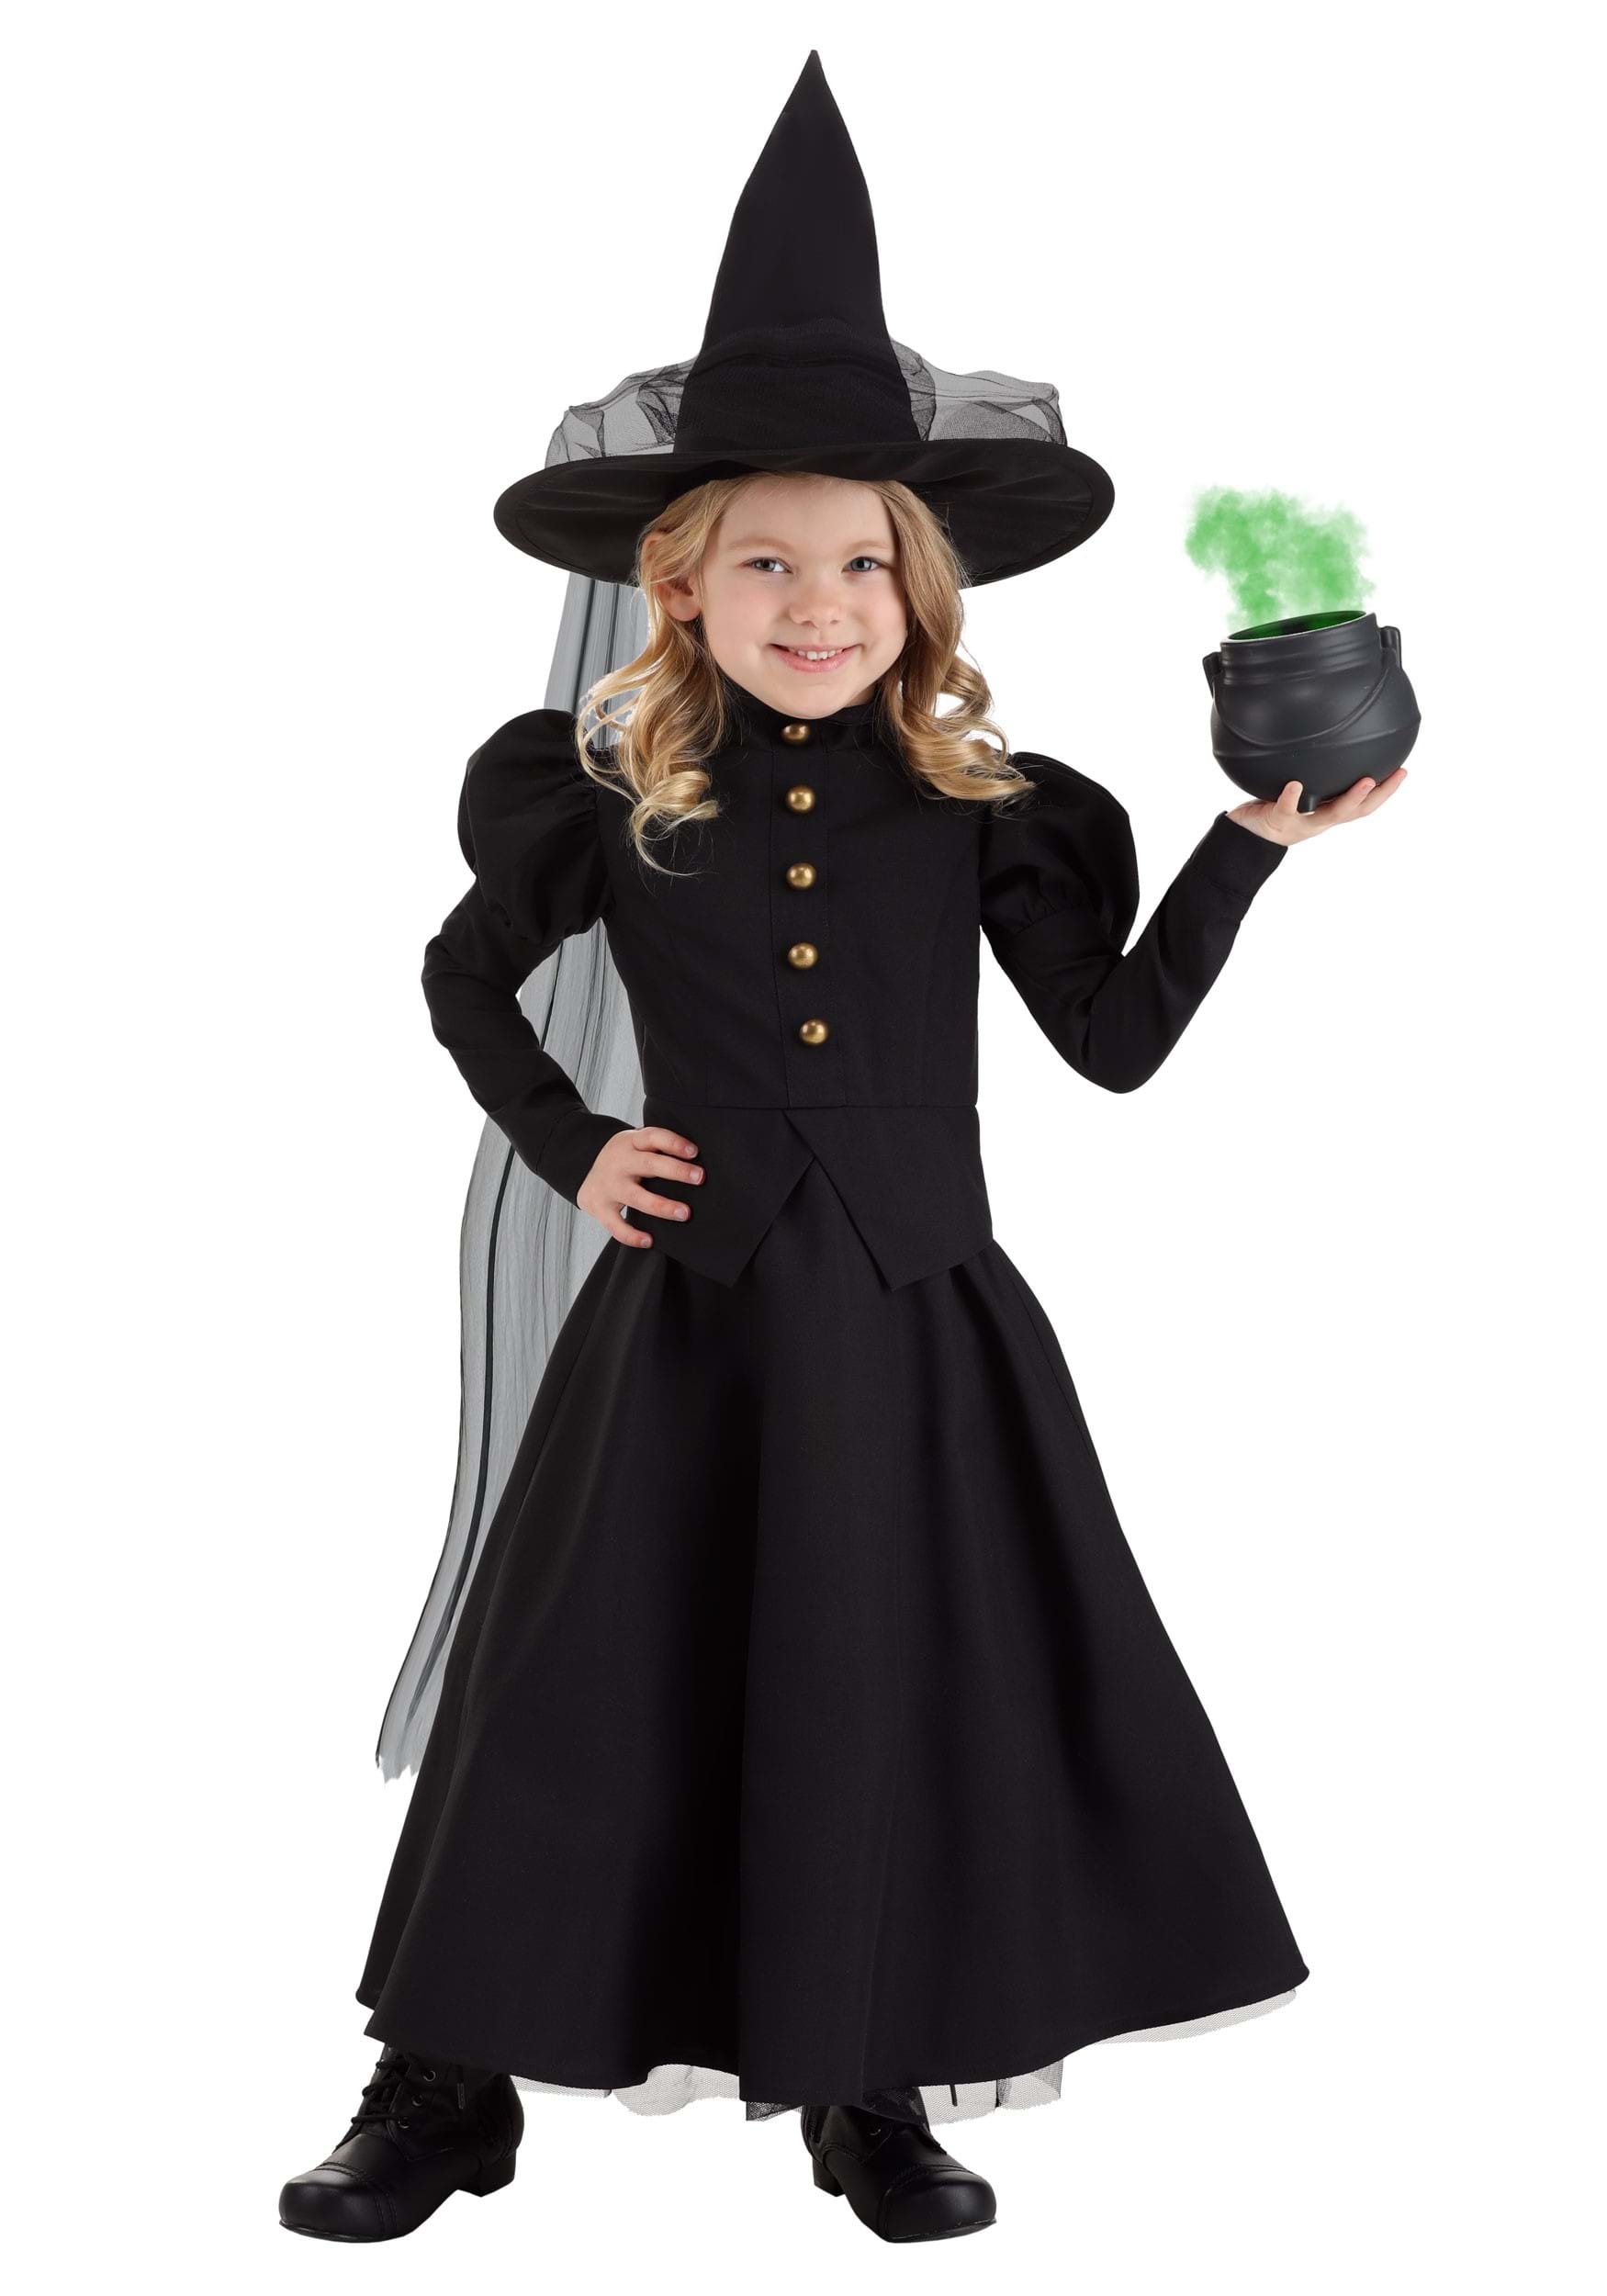 Girl's Toddler Deluxe Witch Costume